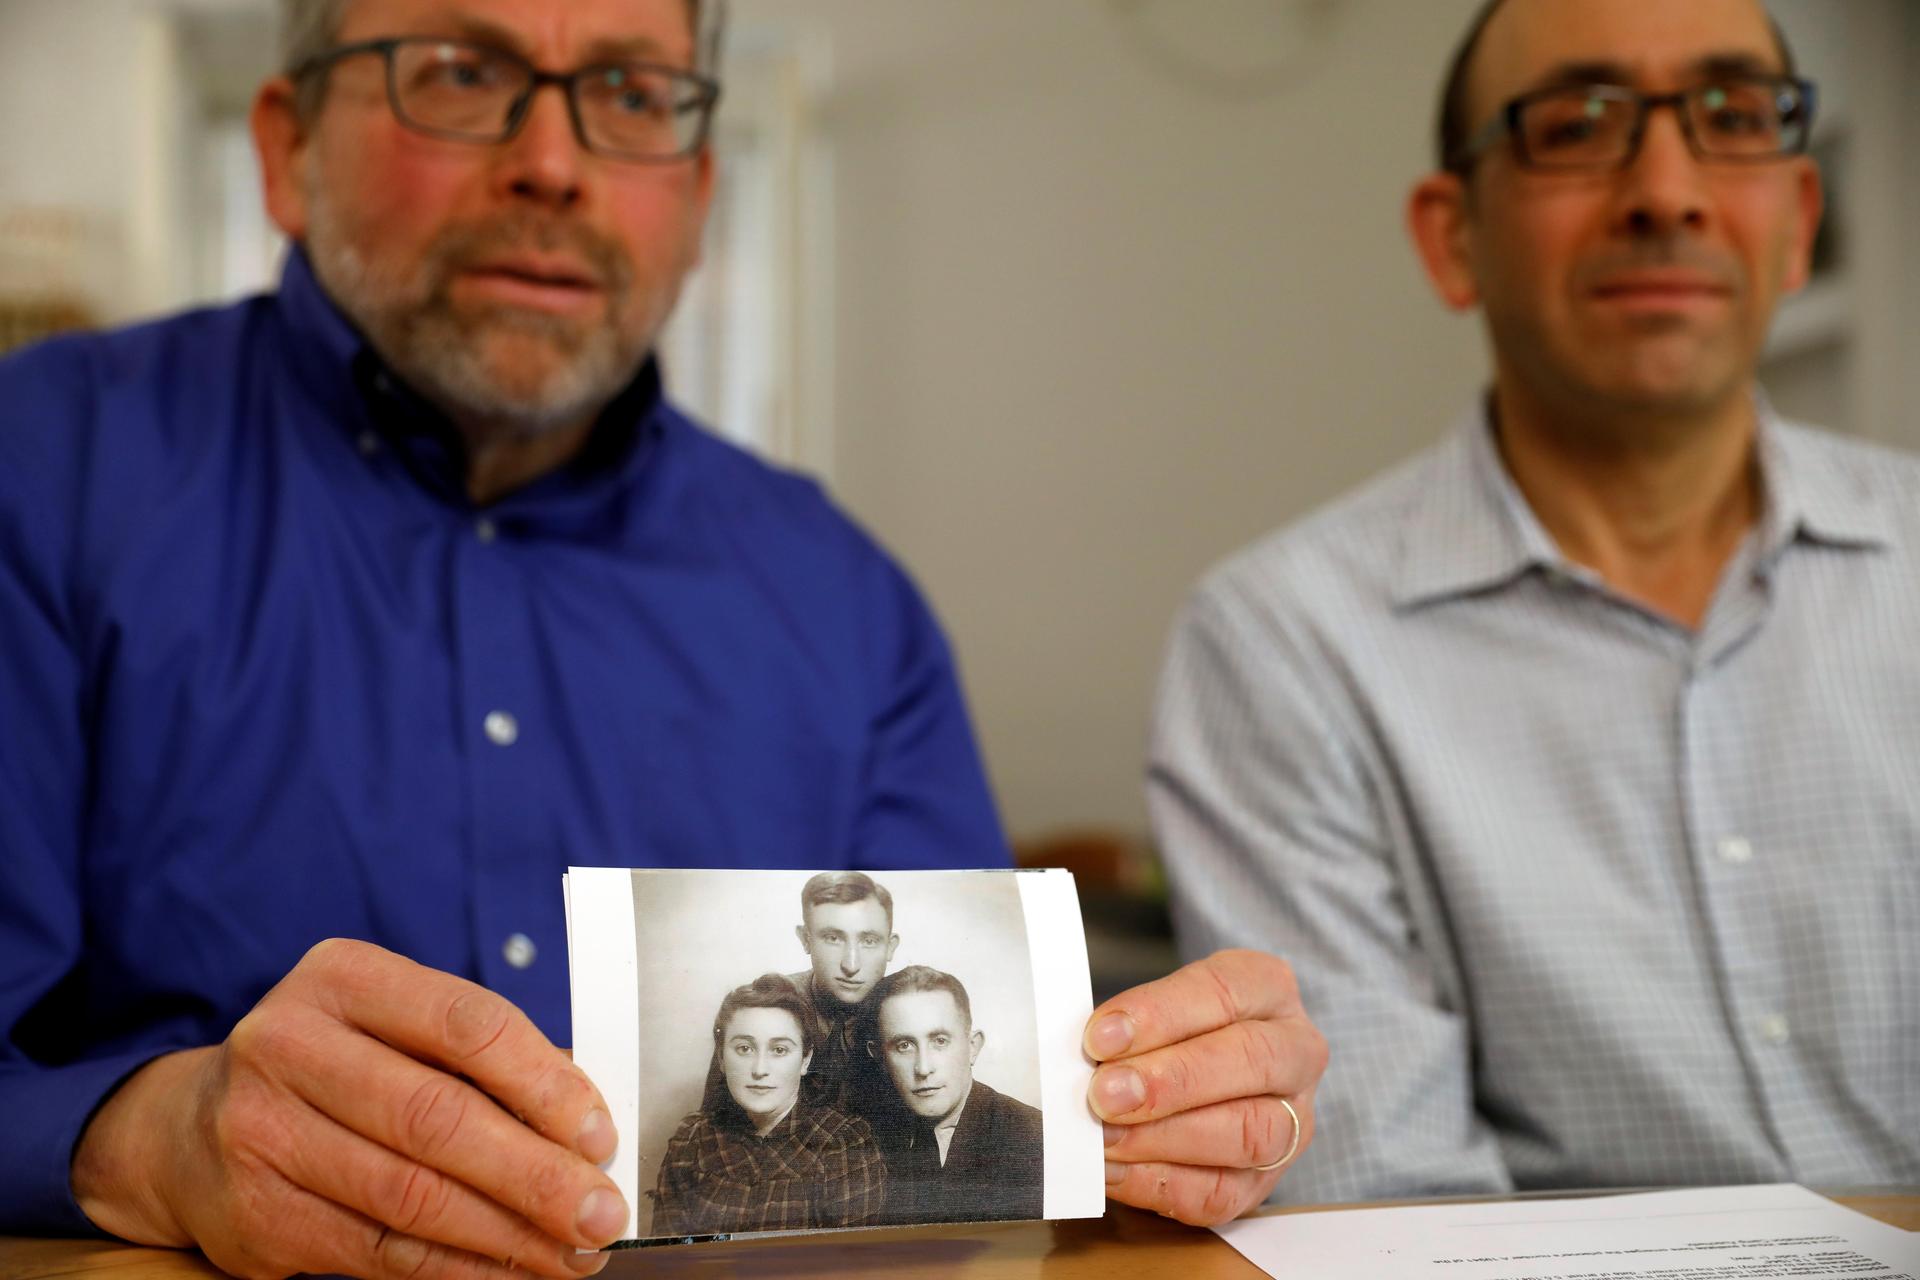 Israeli facial recognition could help discover fate of Holocaust victims